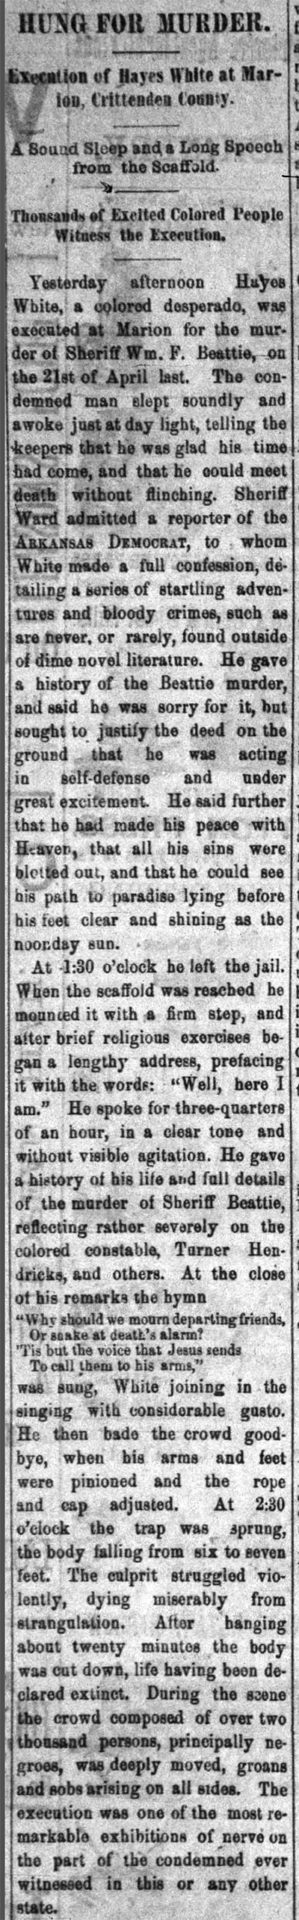 "Hung for Murder; A sound sleep and a long speech from the scaffold" newspaper clipping